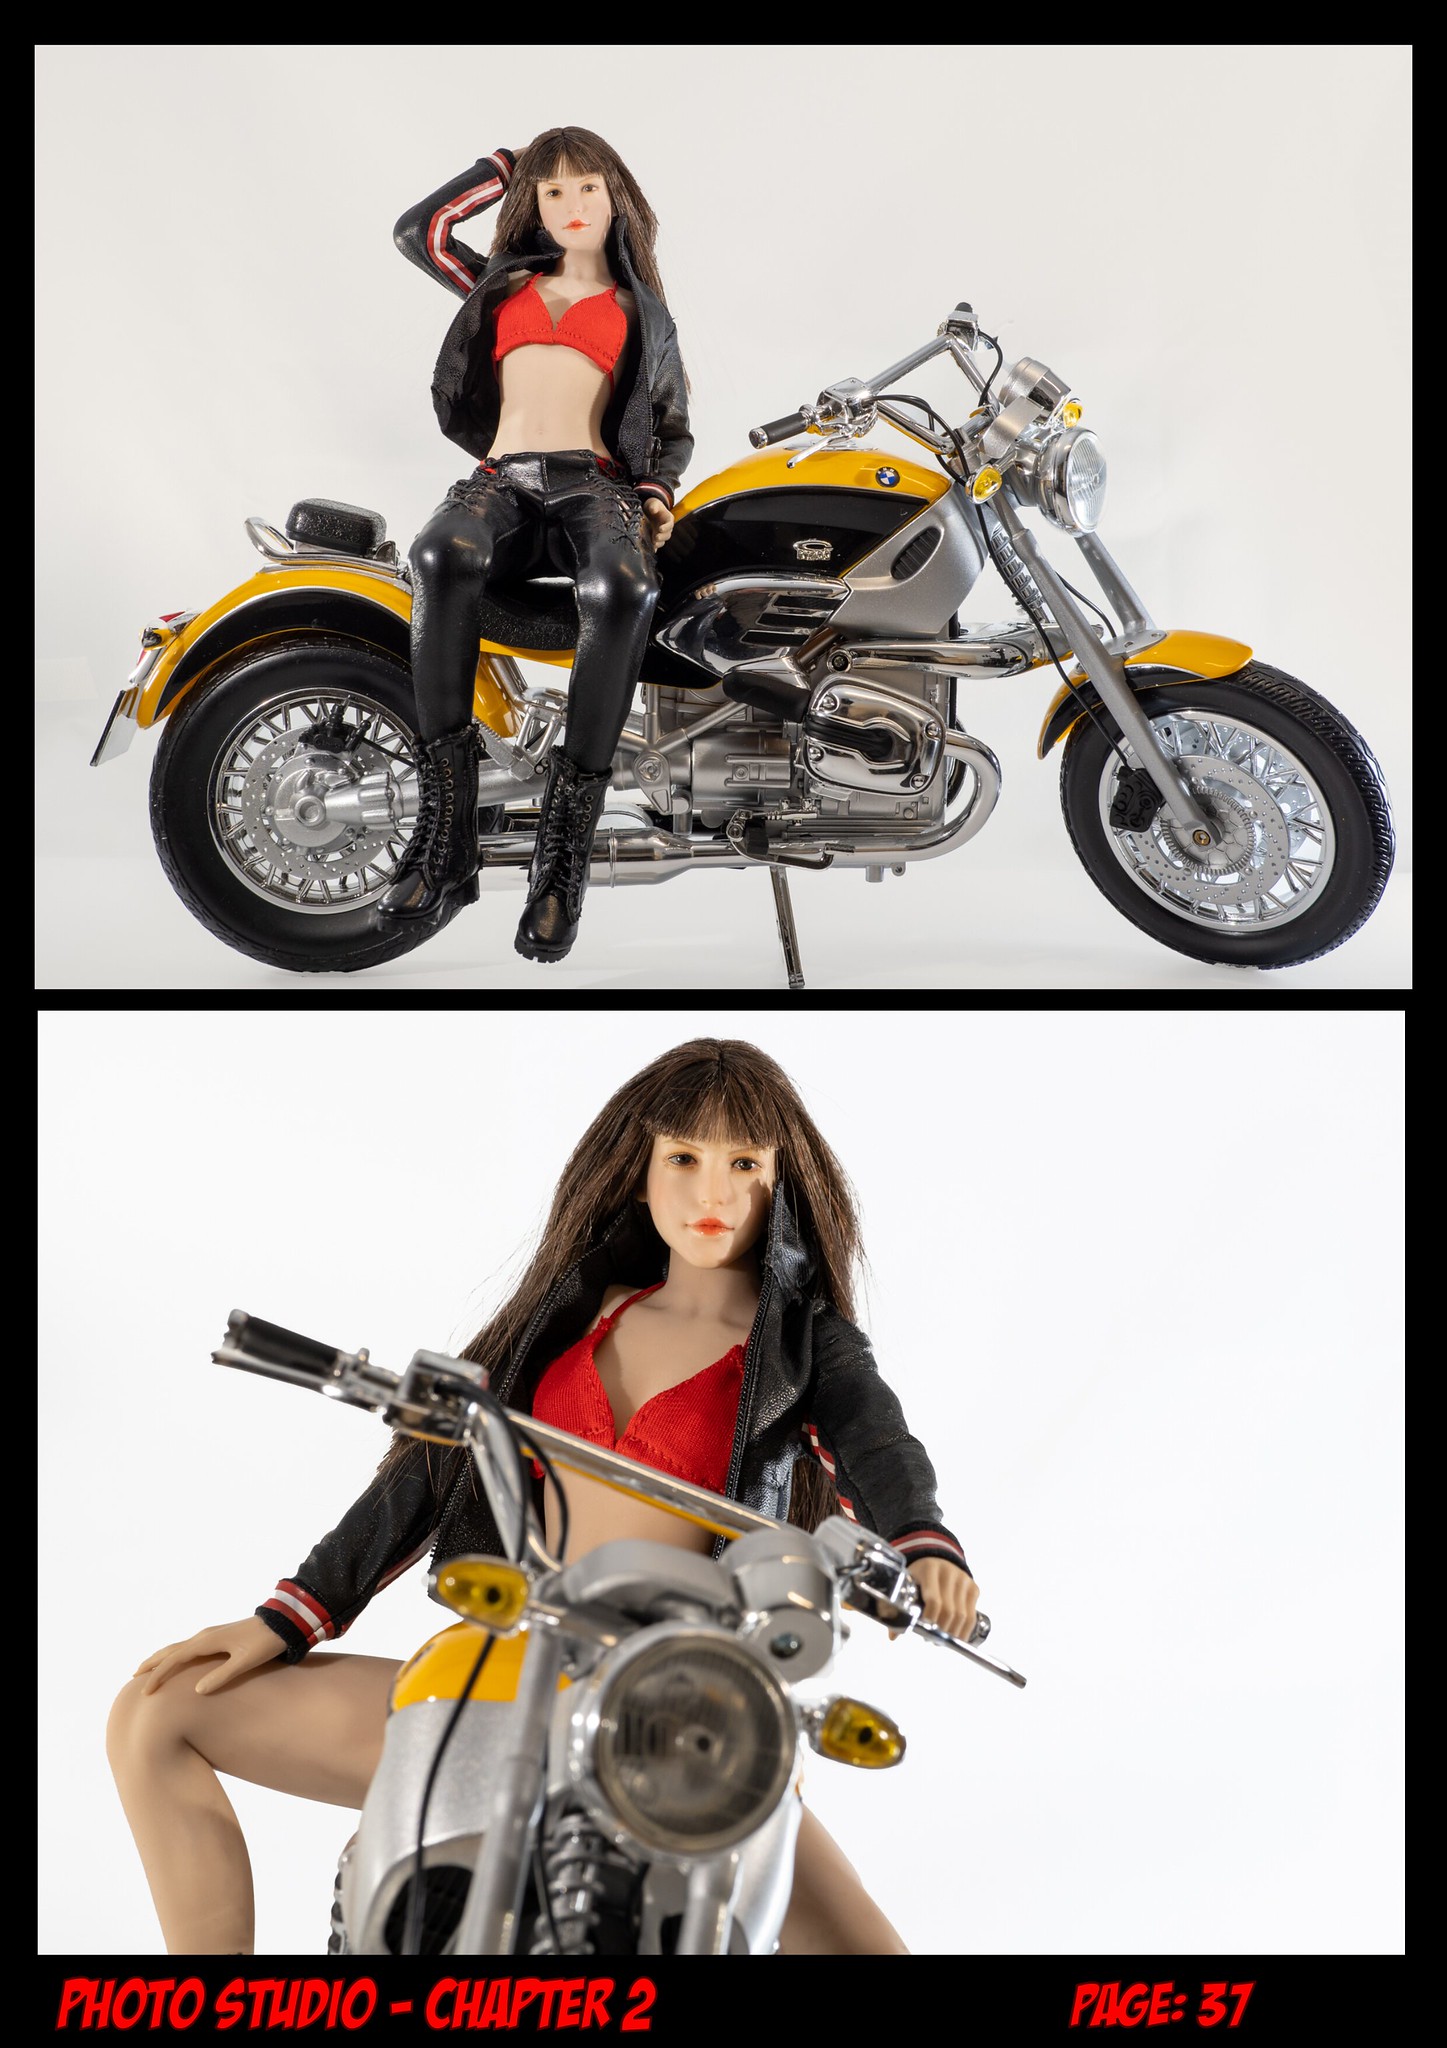 Photo Studio - Chapter two... Bring in the bikes... 51216916104_efd82f2437_k